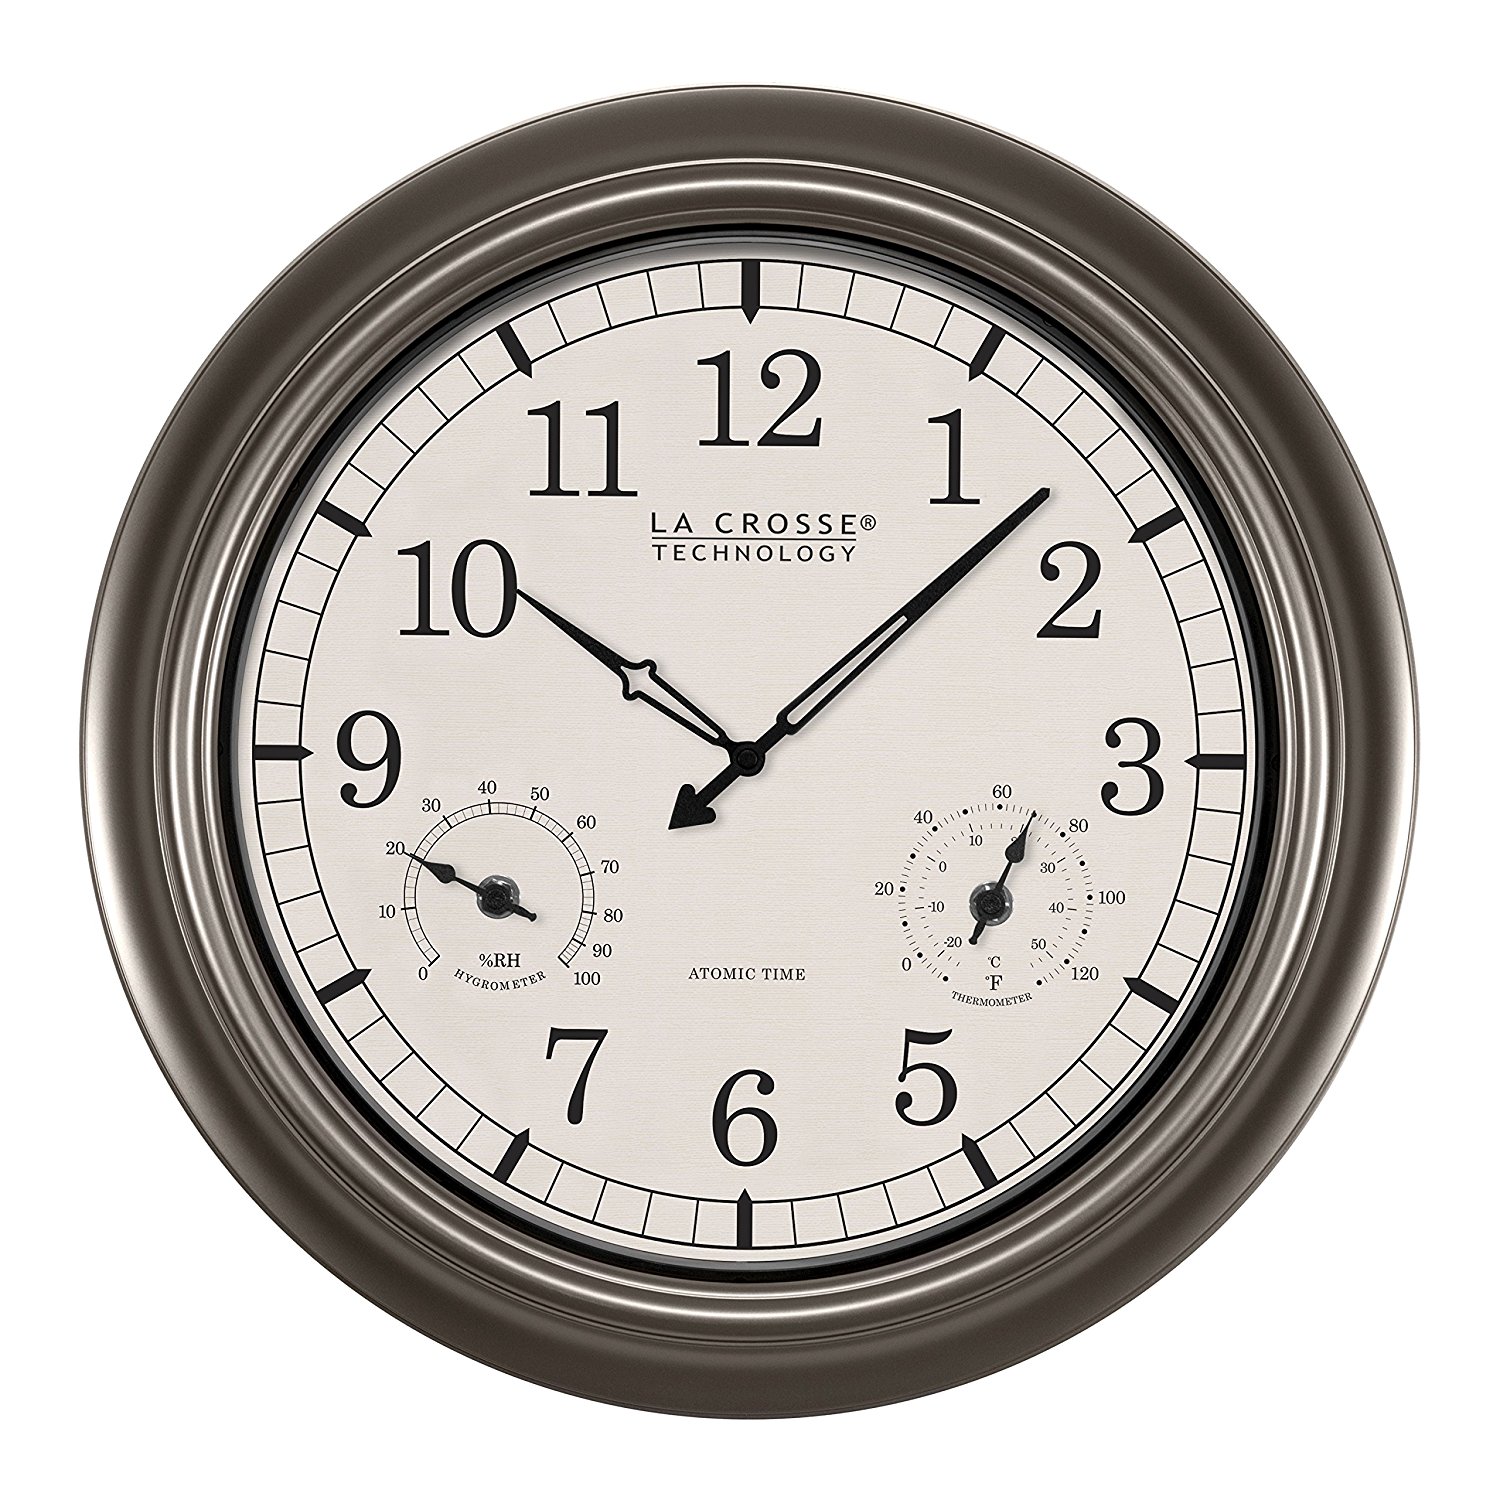 La Crosse Technology WT-3181PL Atomic Outdoor Clock with Temperature & Humidity-18 inch